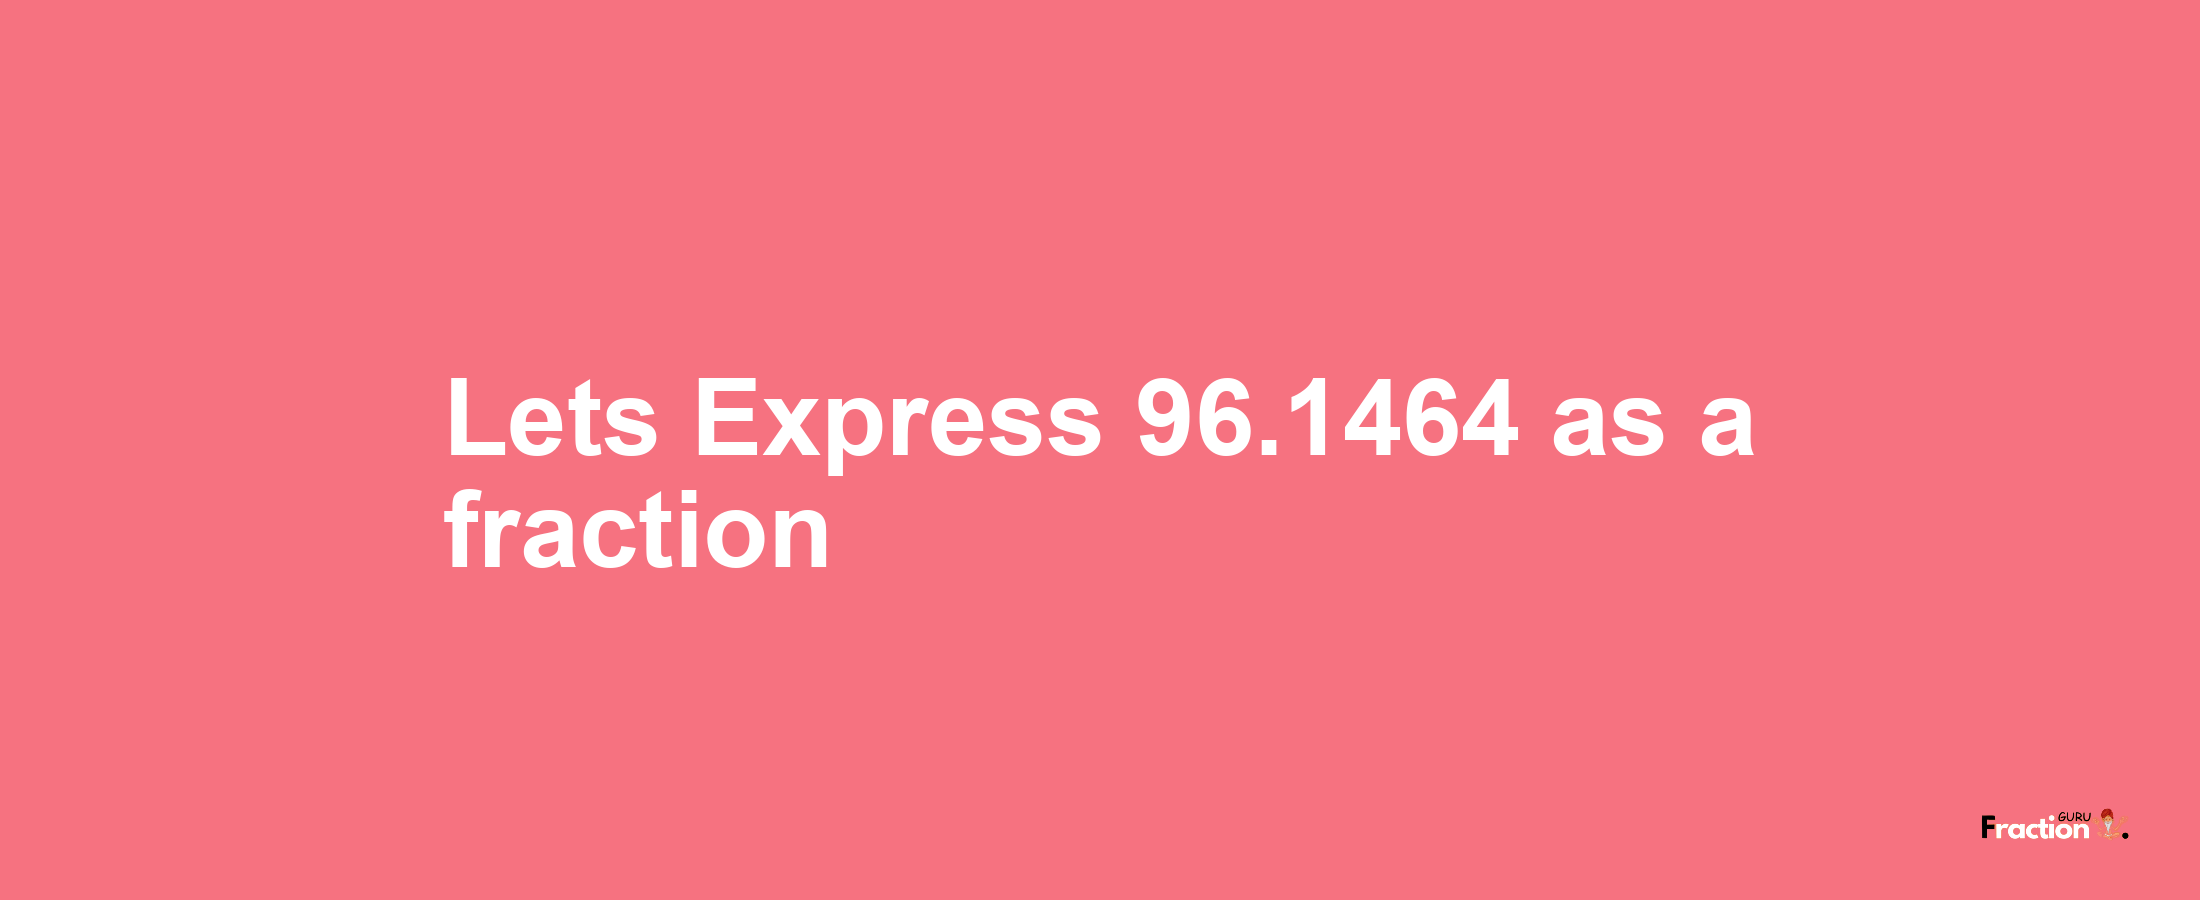 Lets Express 96.1464 as afraction